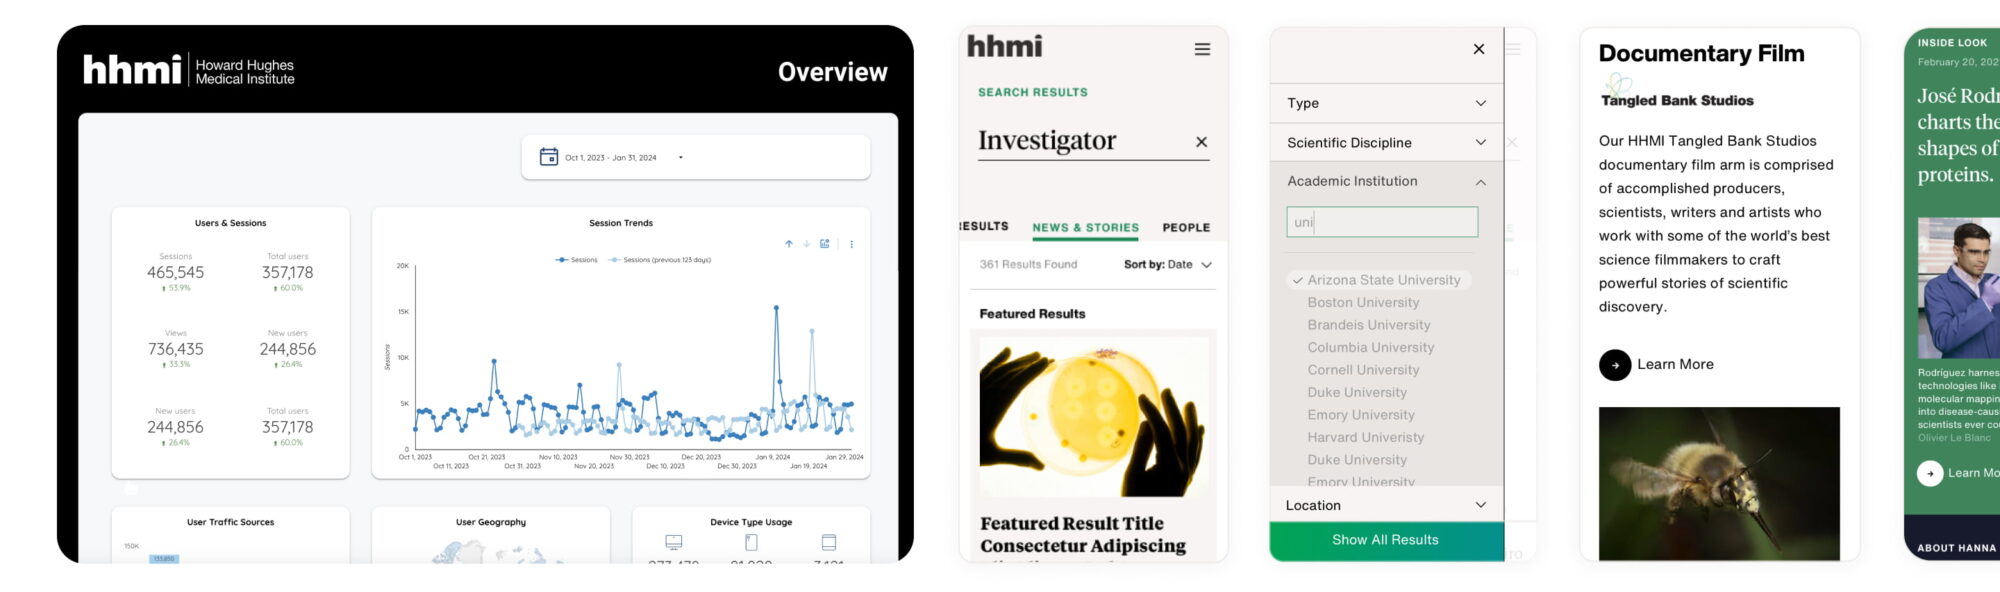 HHMI analytics dashboard and mobile page designs